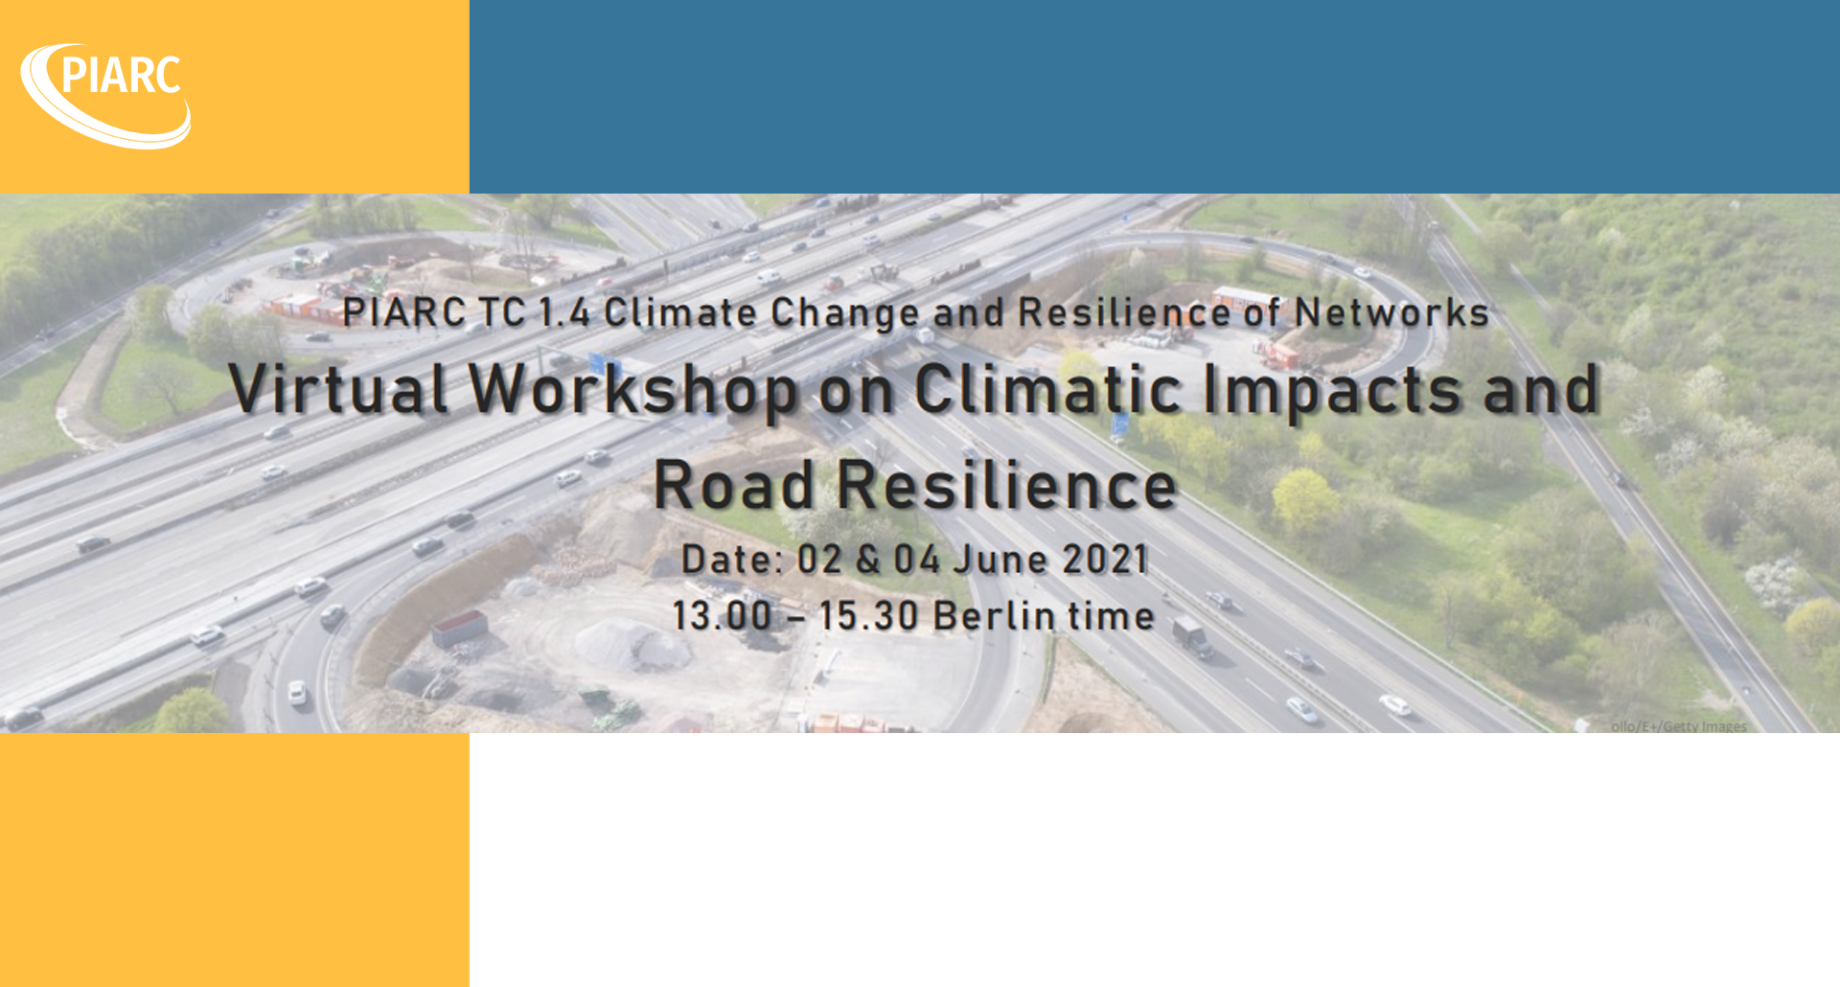 Join PIARC’s next workshop on Climate Impacts and Road Resilience, on 2 &#38; 4 June!